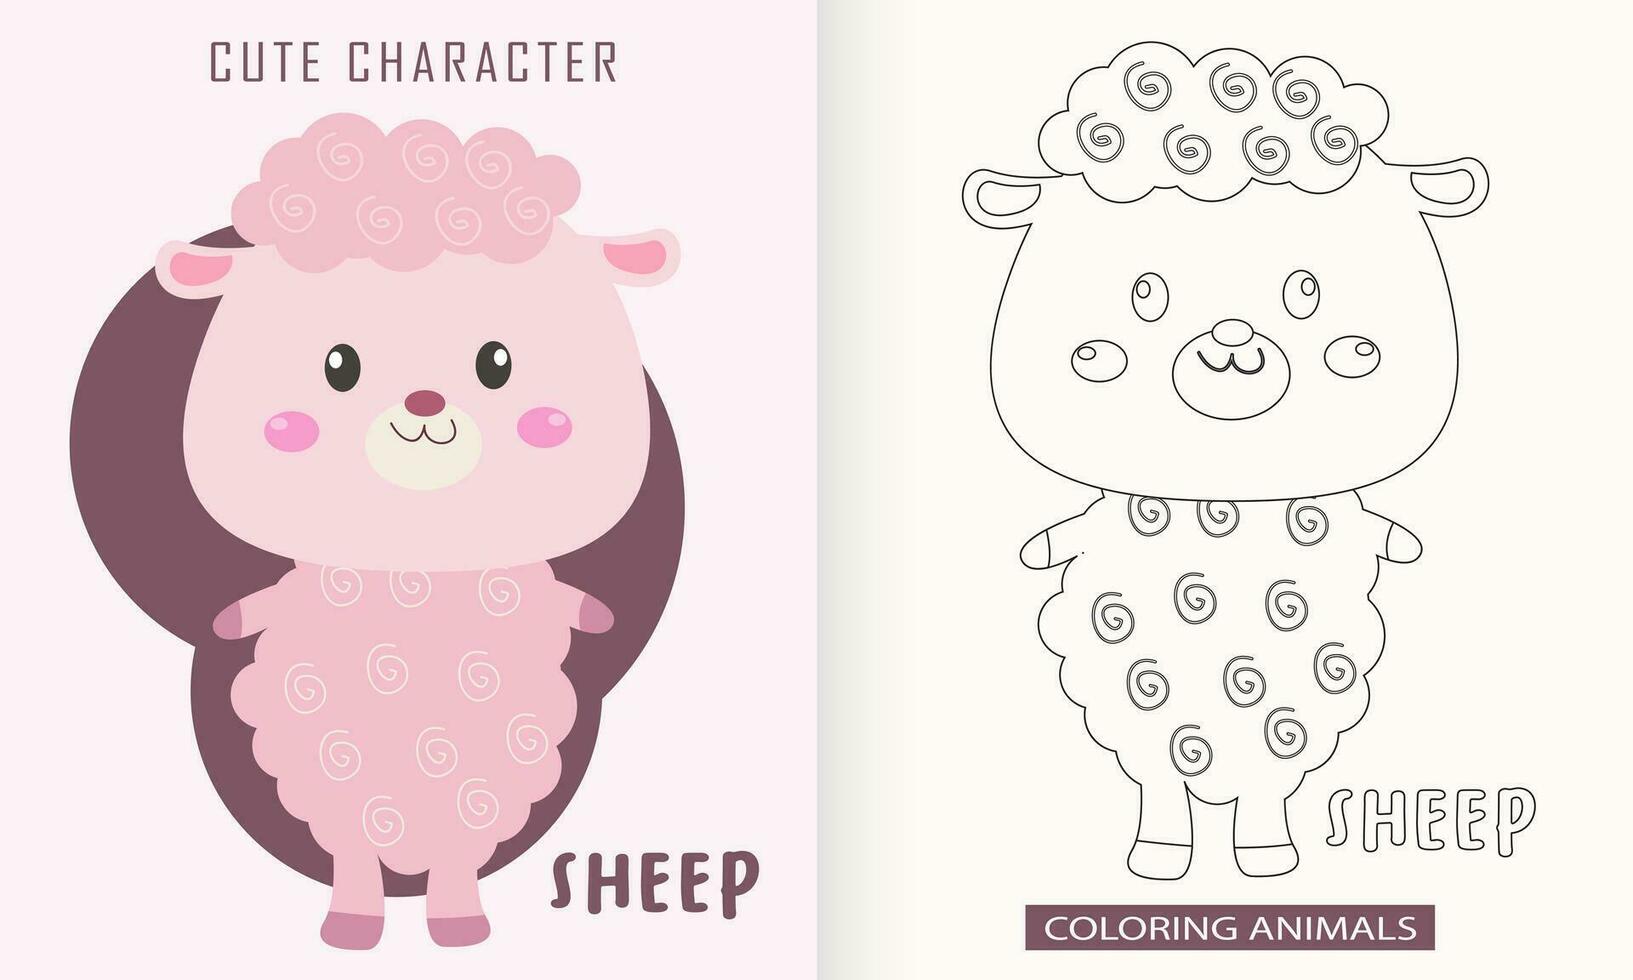 Animal character coloring book for cute sheep vector